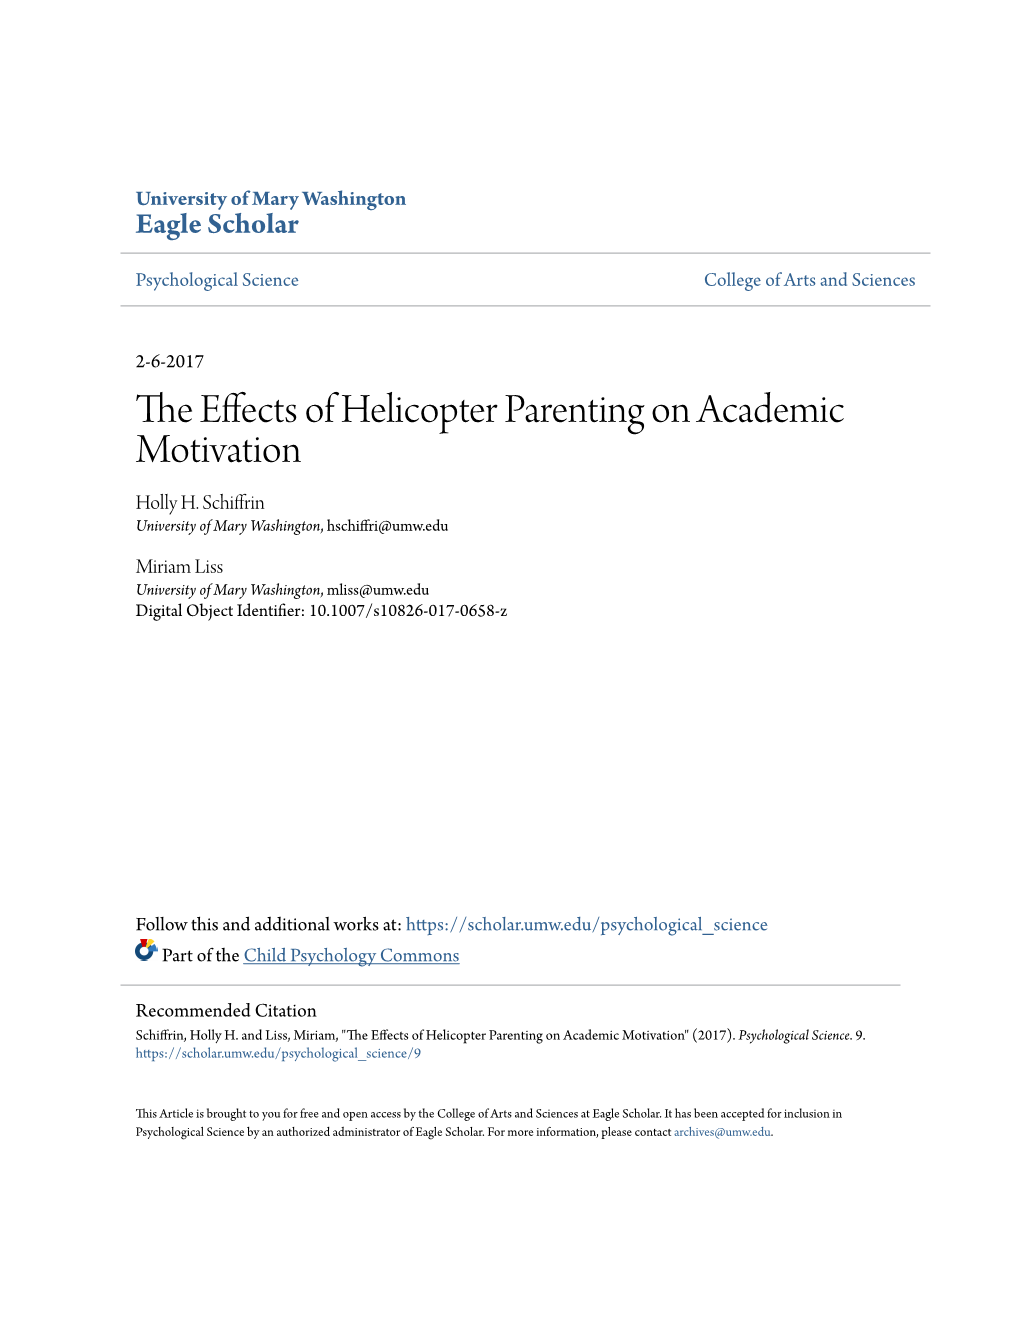 The Effects of Helicopter Parenting on Academic Motivation" (2017)